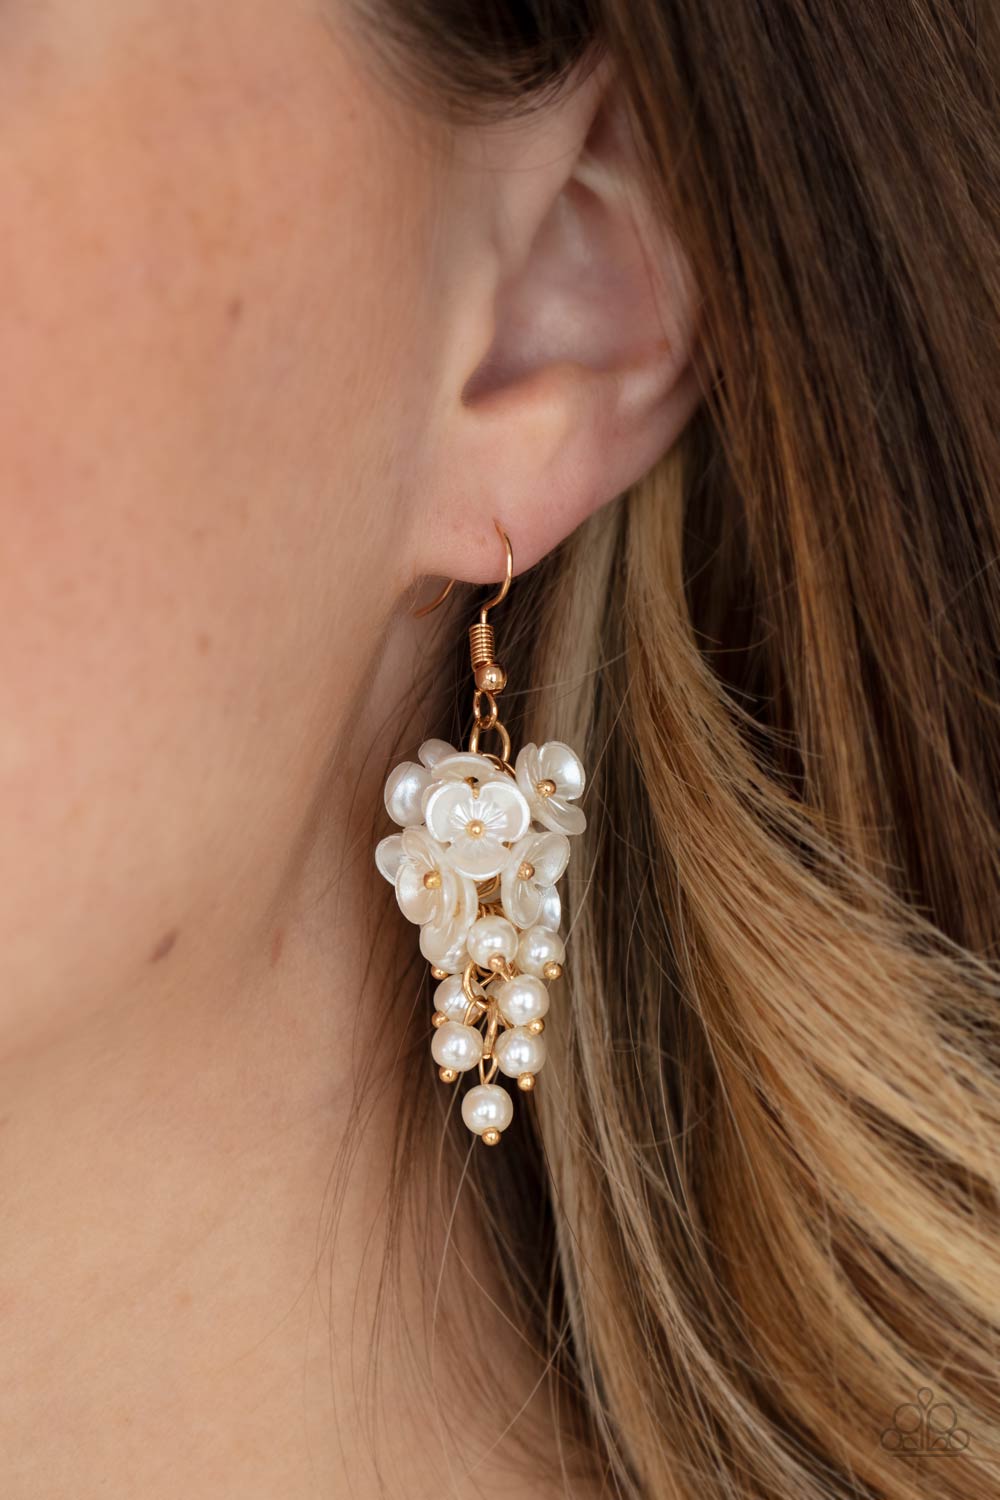 Bountiful Bouquets - Gold earrings (Life of the Party - June 2021)